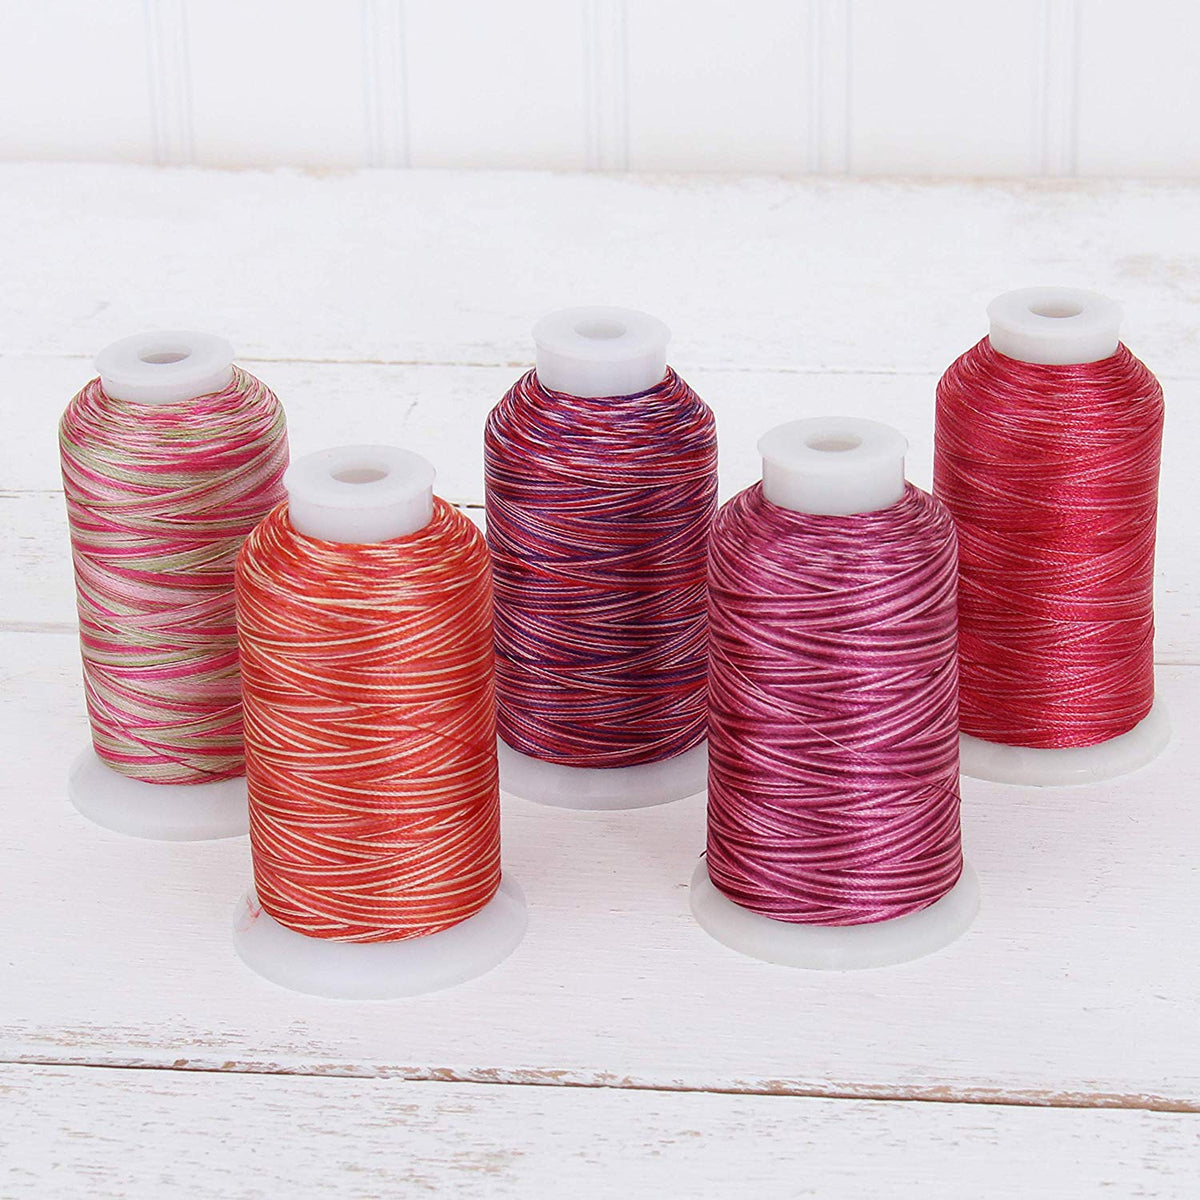  Threadart Variegated Polyester Embroidery Thread - 40wt - 1000m  - 25 Colors Available - No. 18 - Arabian Nights